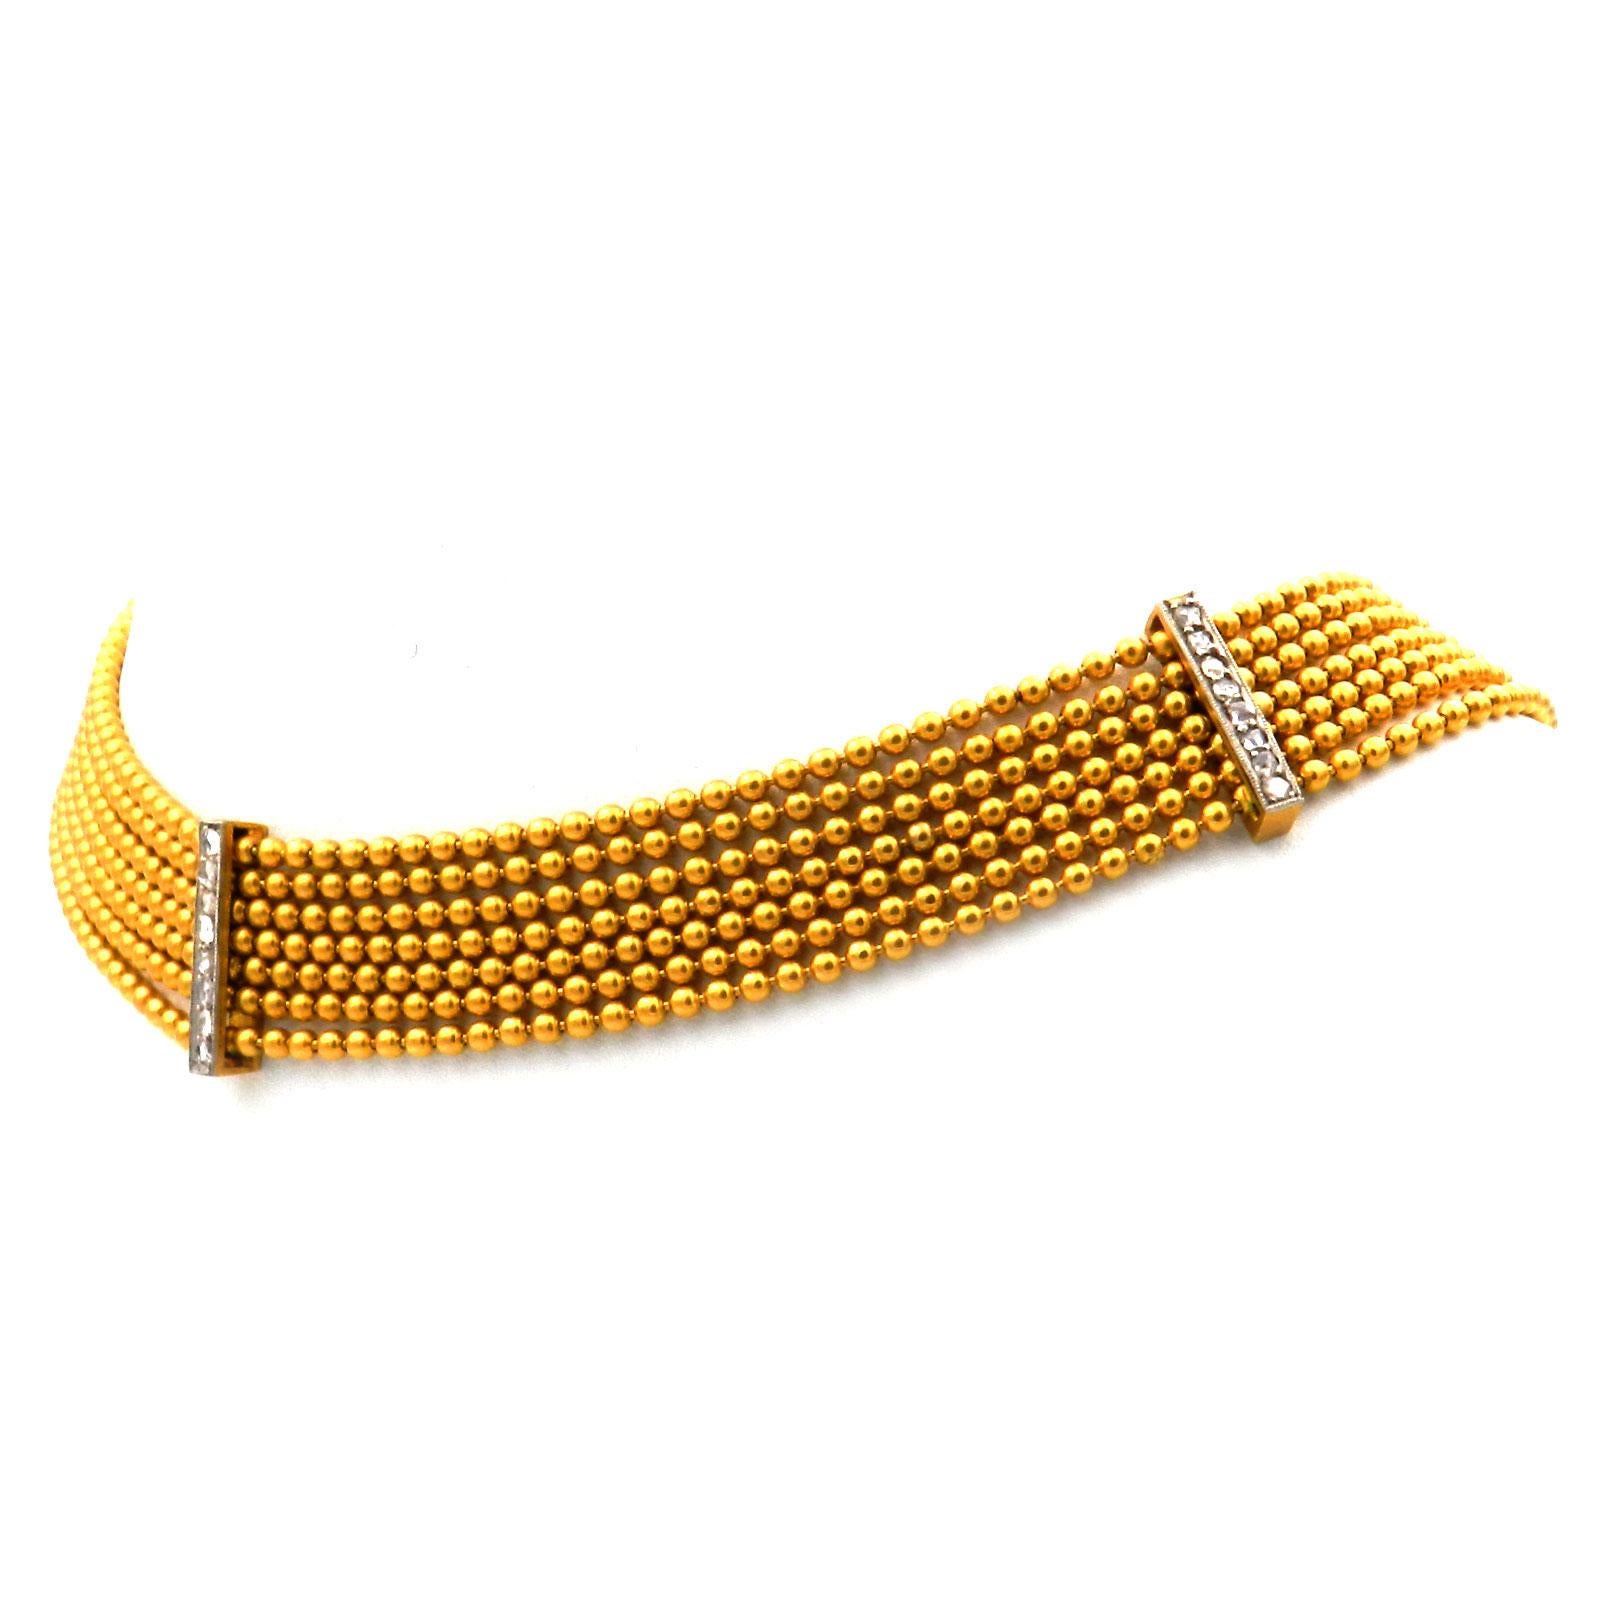 Antique 14K Gold Diamond Collier de Chien Choker Necklace circa 1910

This necklace, which fits snugly around the neck, is characterized by unique elegance and special craftsmanship. It is made of seven cords with small gold beads and held together